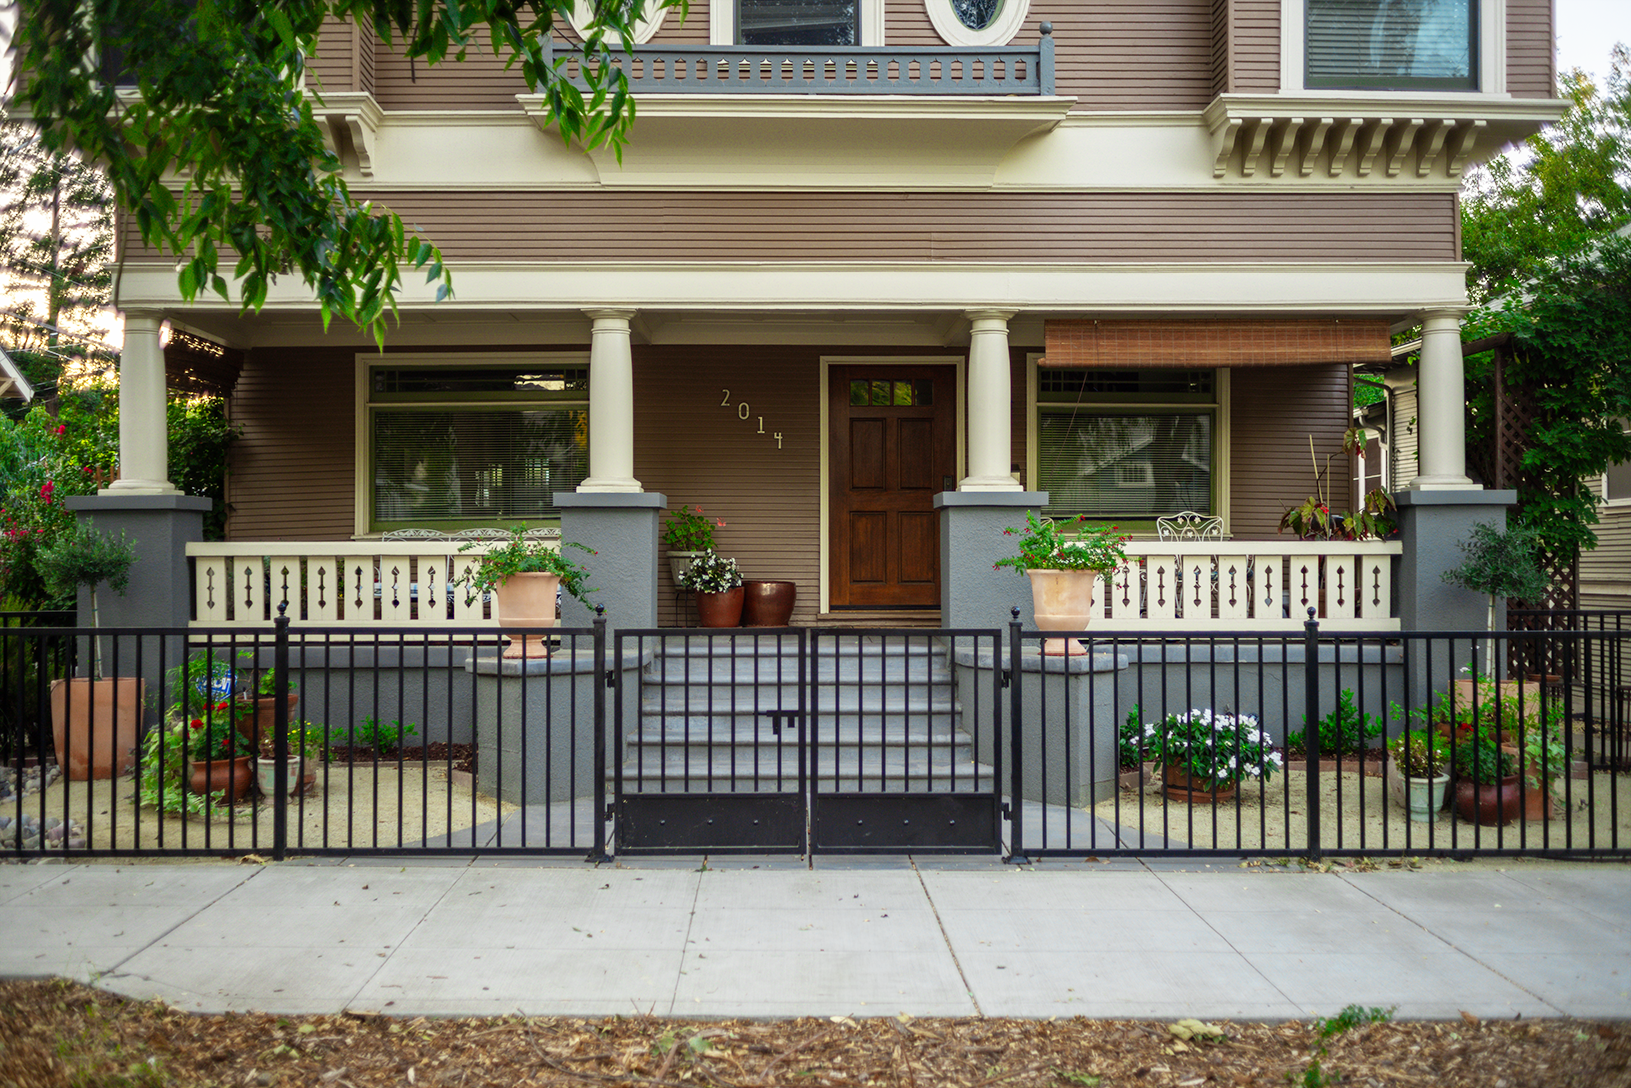 Elegant residential black ornamental metal fence enhancing home security and curb appeal, with a matching gateway leading to a classic brownstone house.